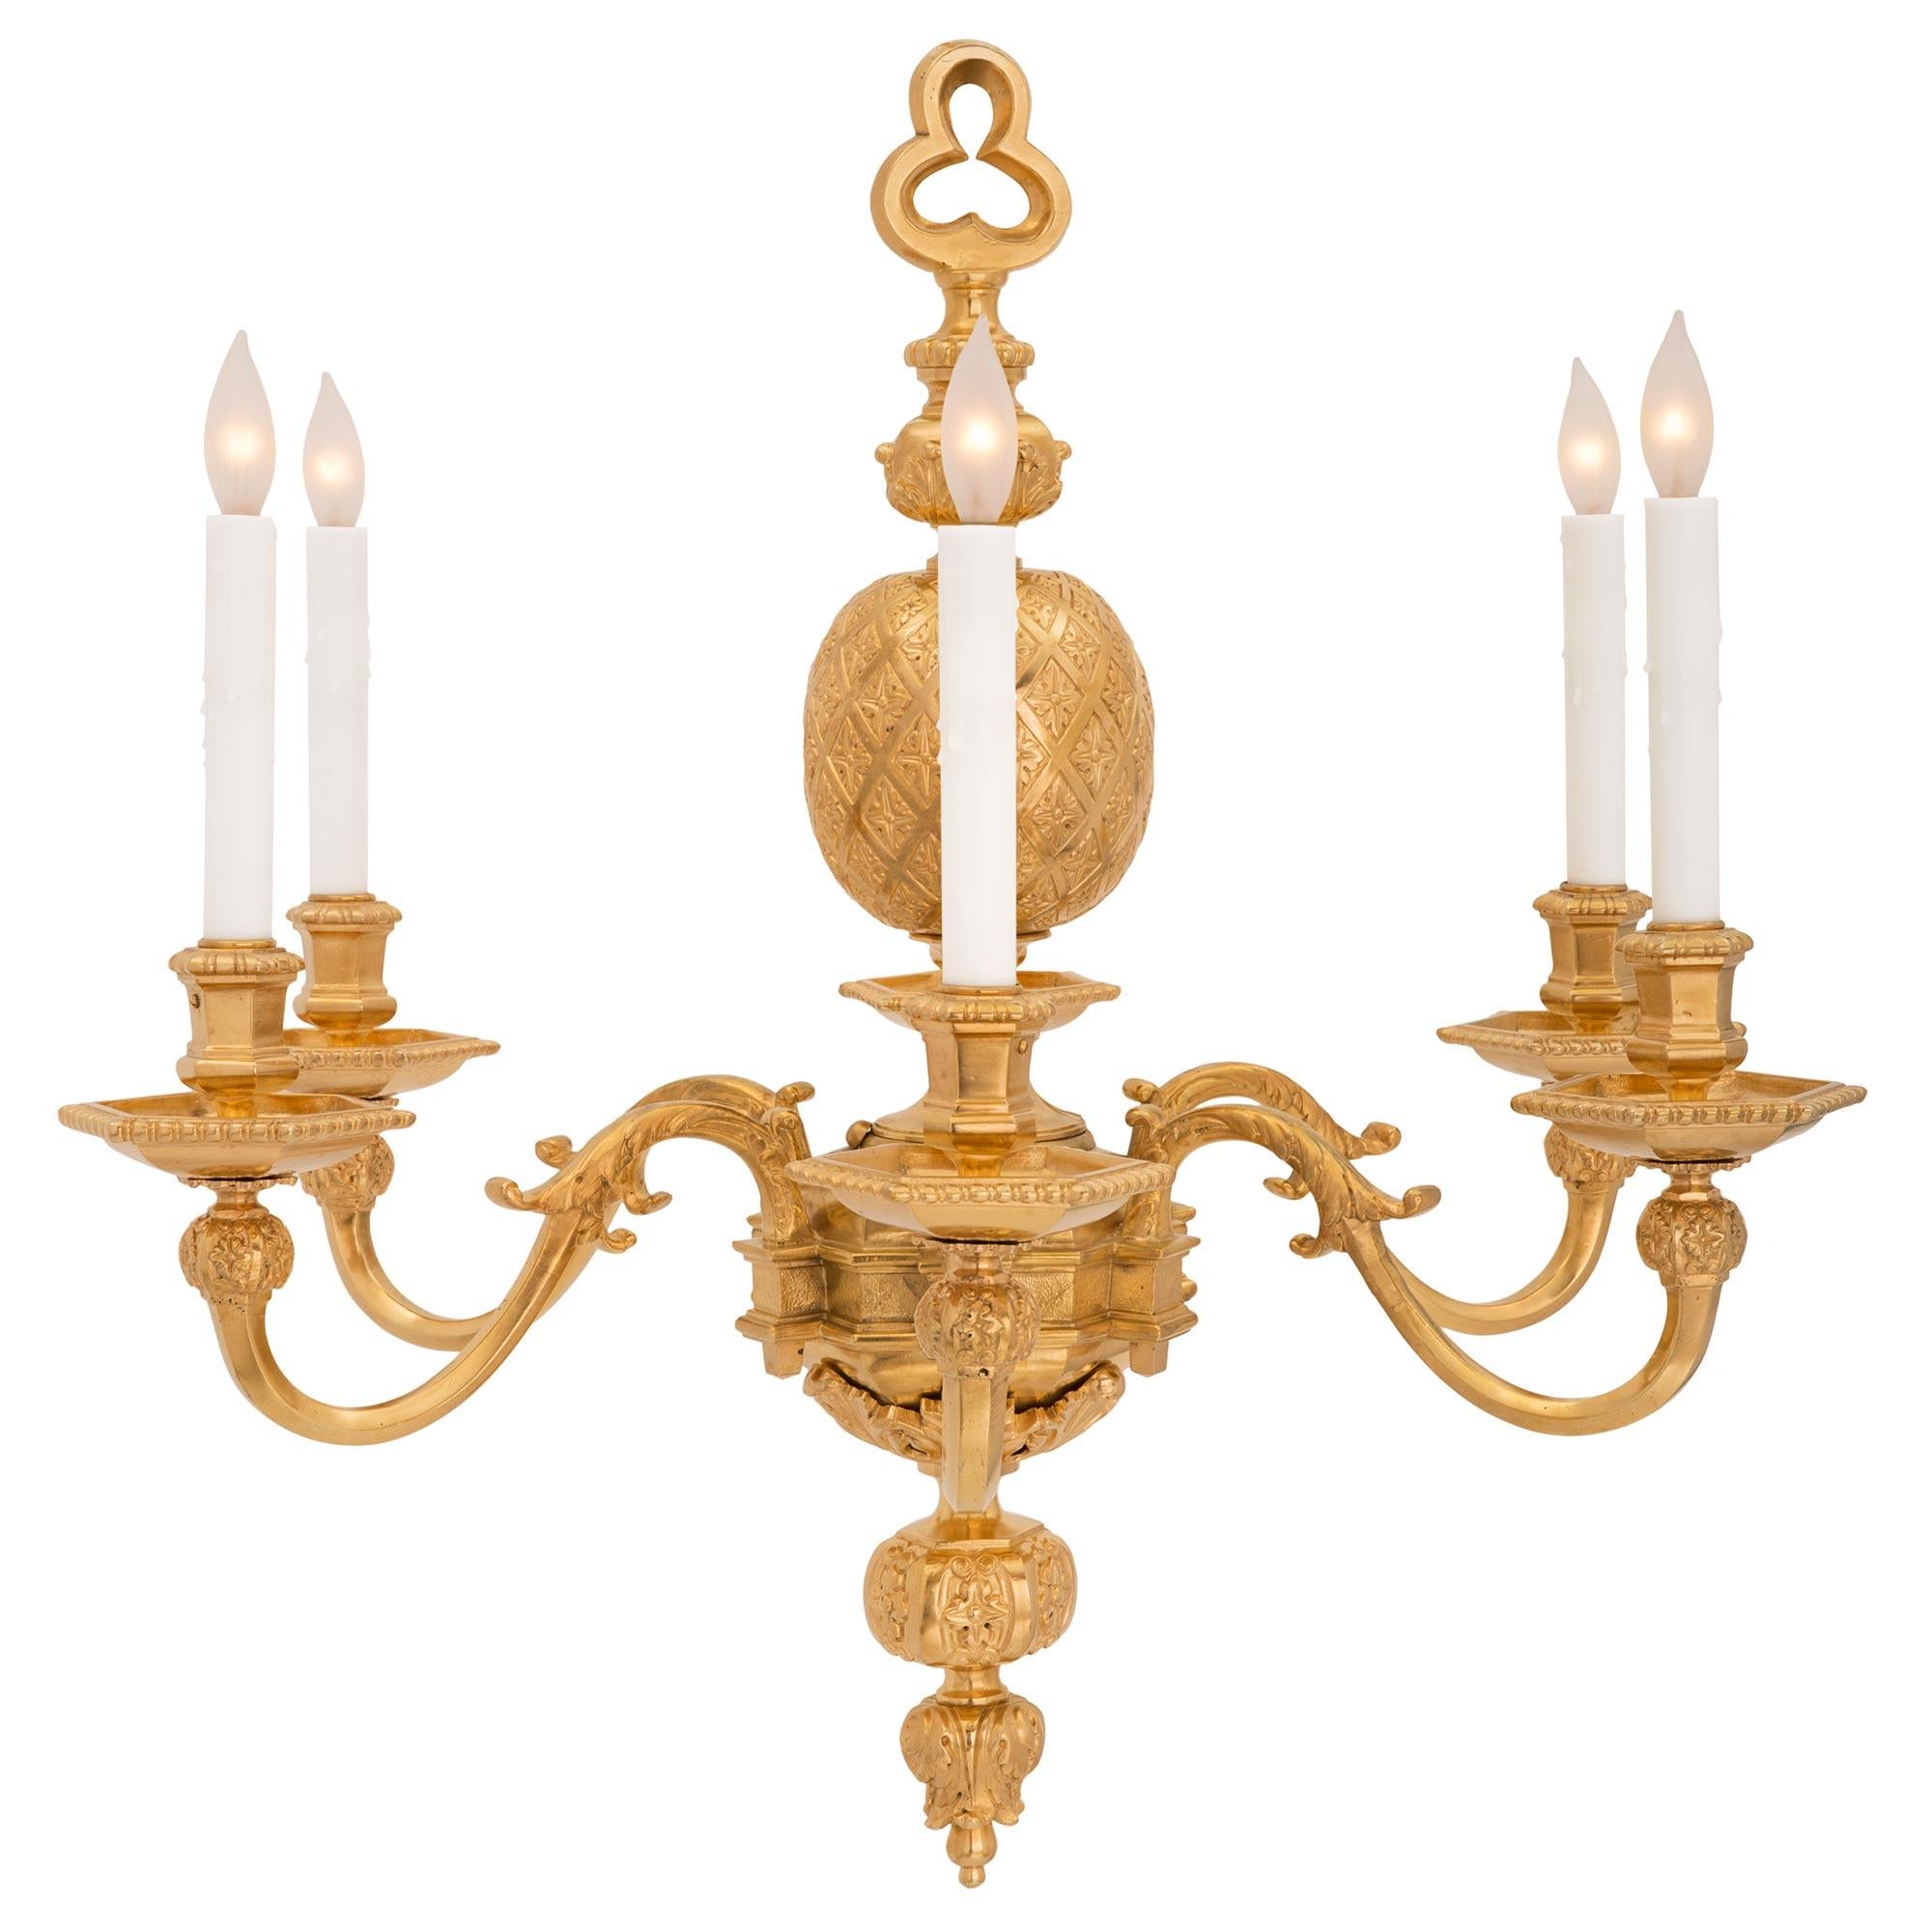 A striking and most unique French 19th century Louis XIV st. ormolu chandelier, signed Vian. The six arm chandelier is centered by a beautiful and richly chased floral finial leading up to acanthus leaves encasing the body. The six elegantly